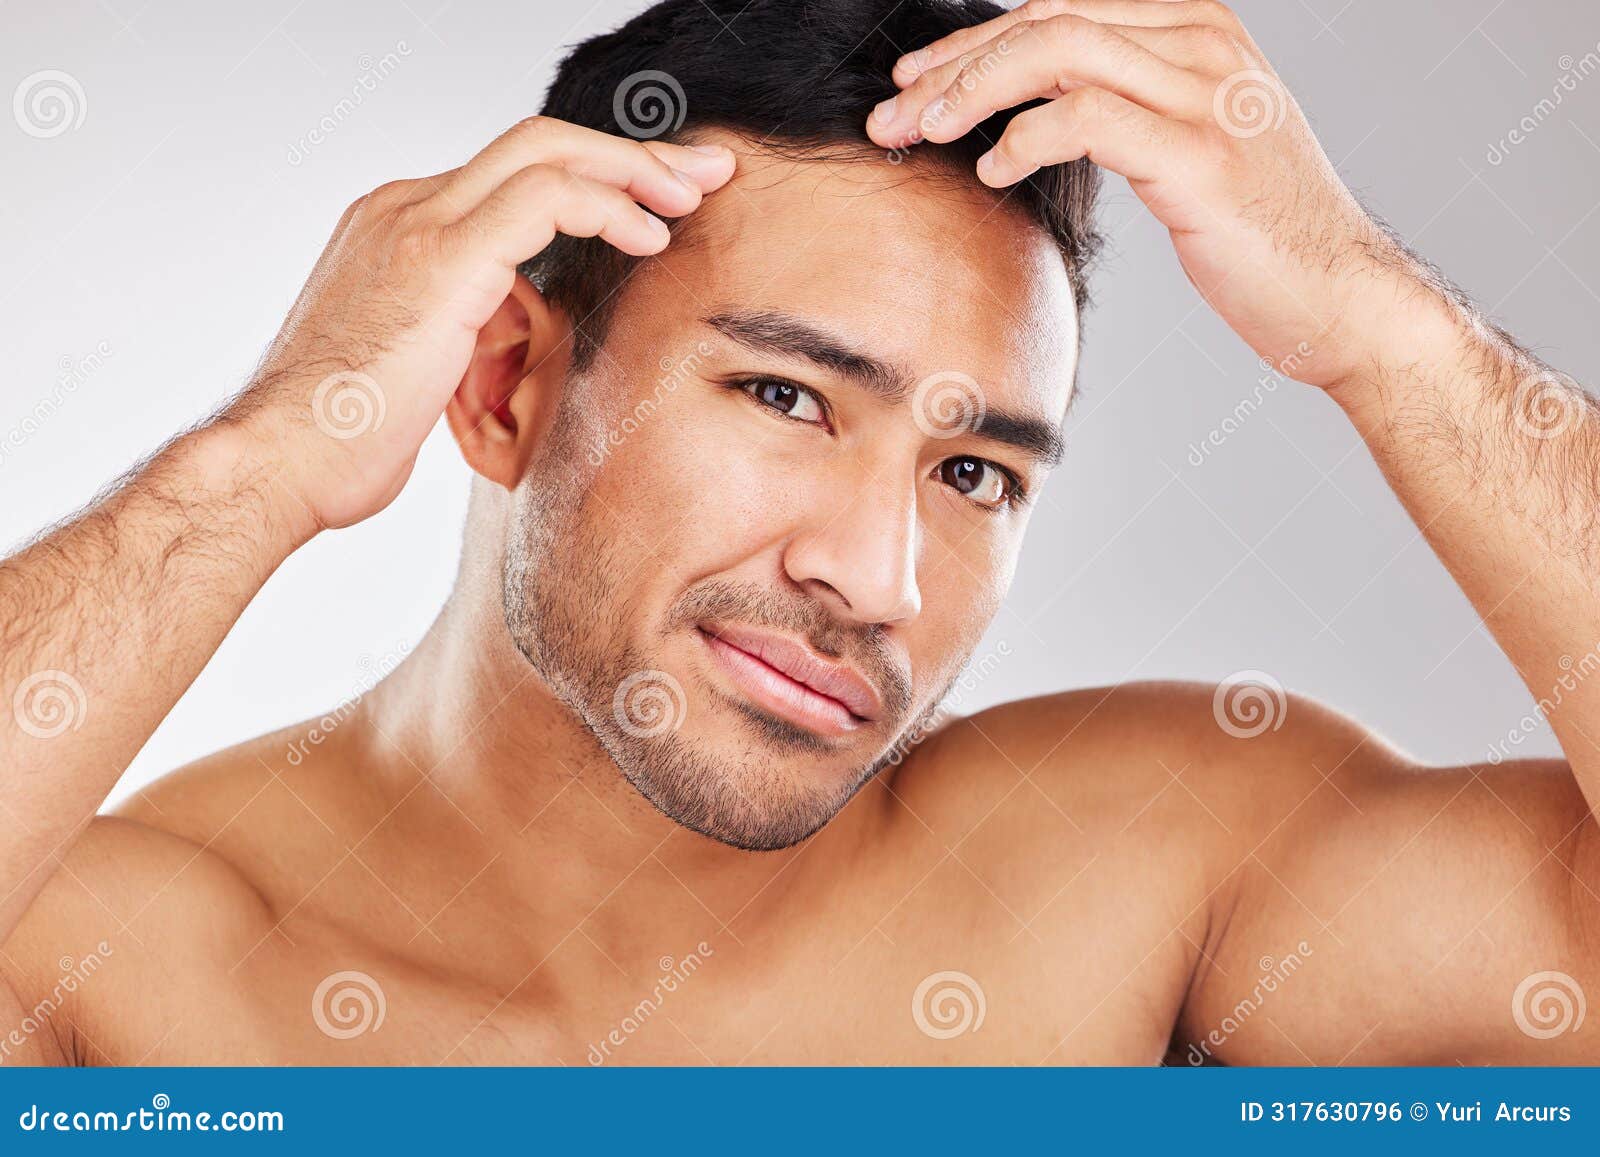 acne, pimple and portrait of natural man in studio on white background for inspection or skincare. beauty, blemish and